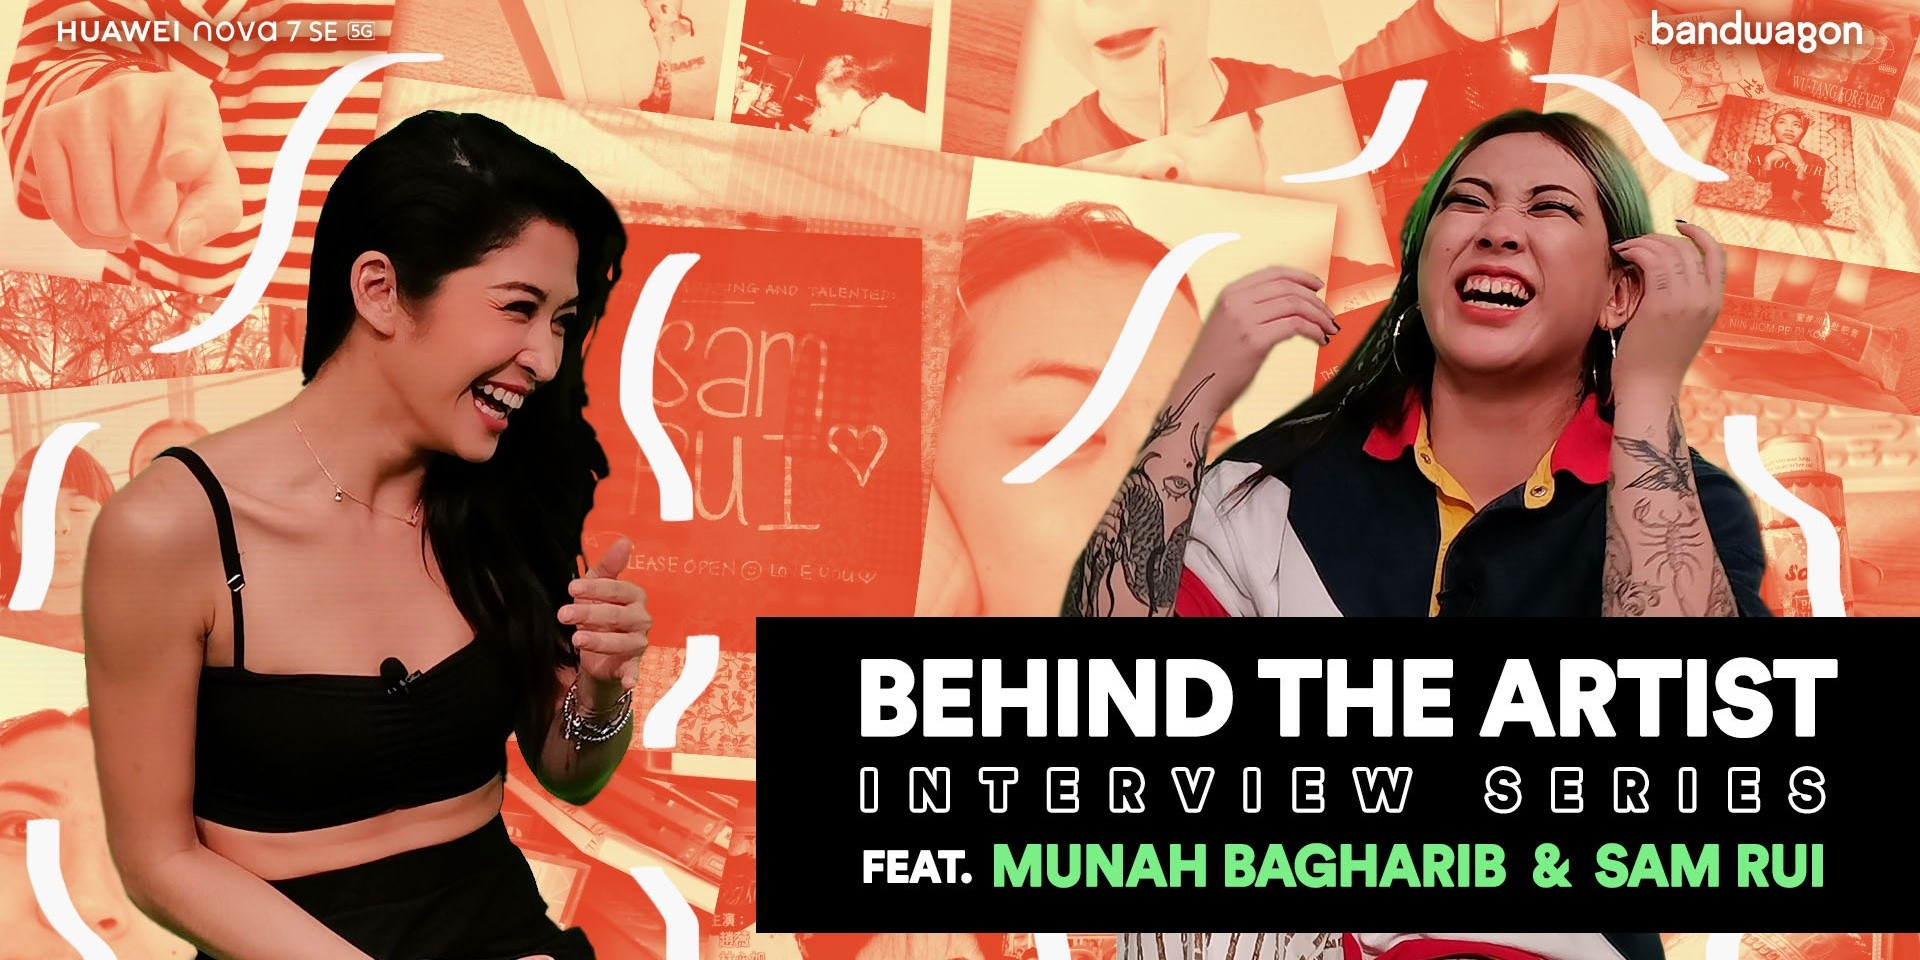 Sam Rui talks childhood memories, relationships, and her latest EP, In Between, in "Behind The Artist" interview series - watch